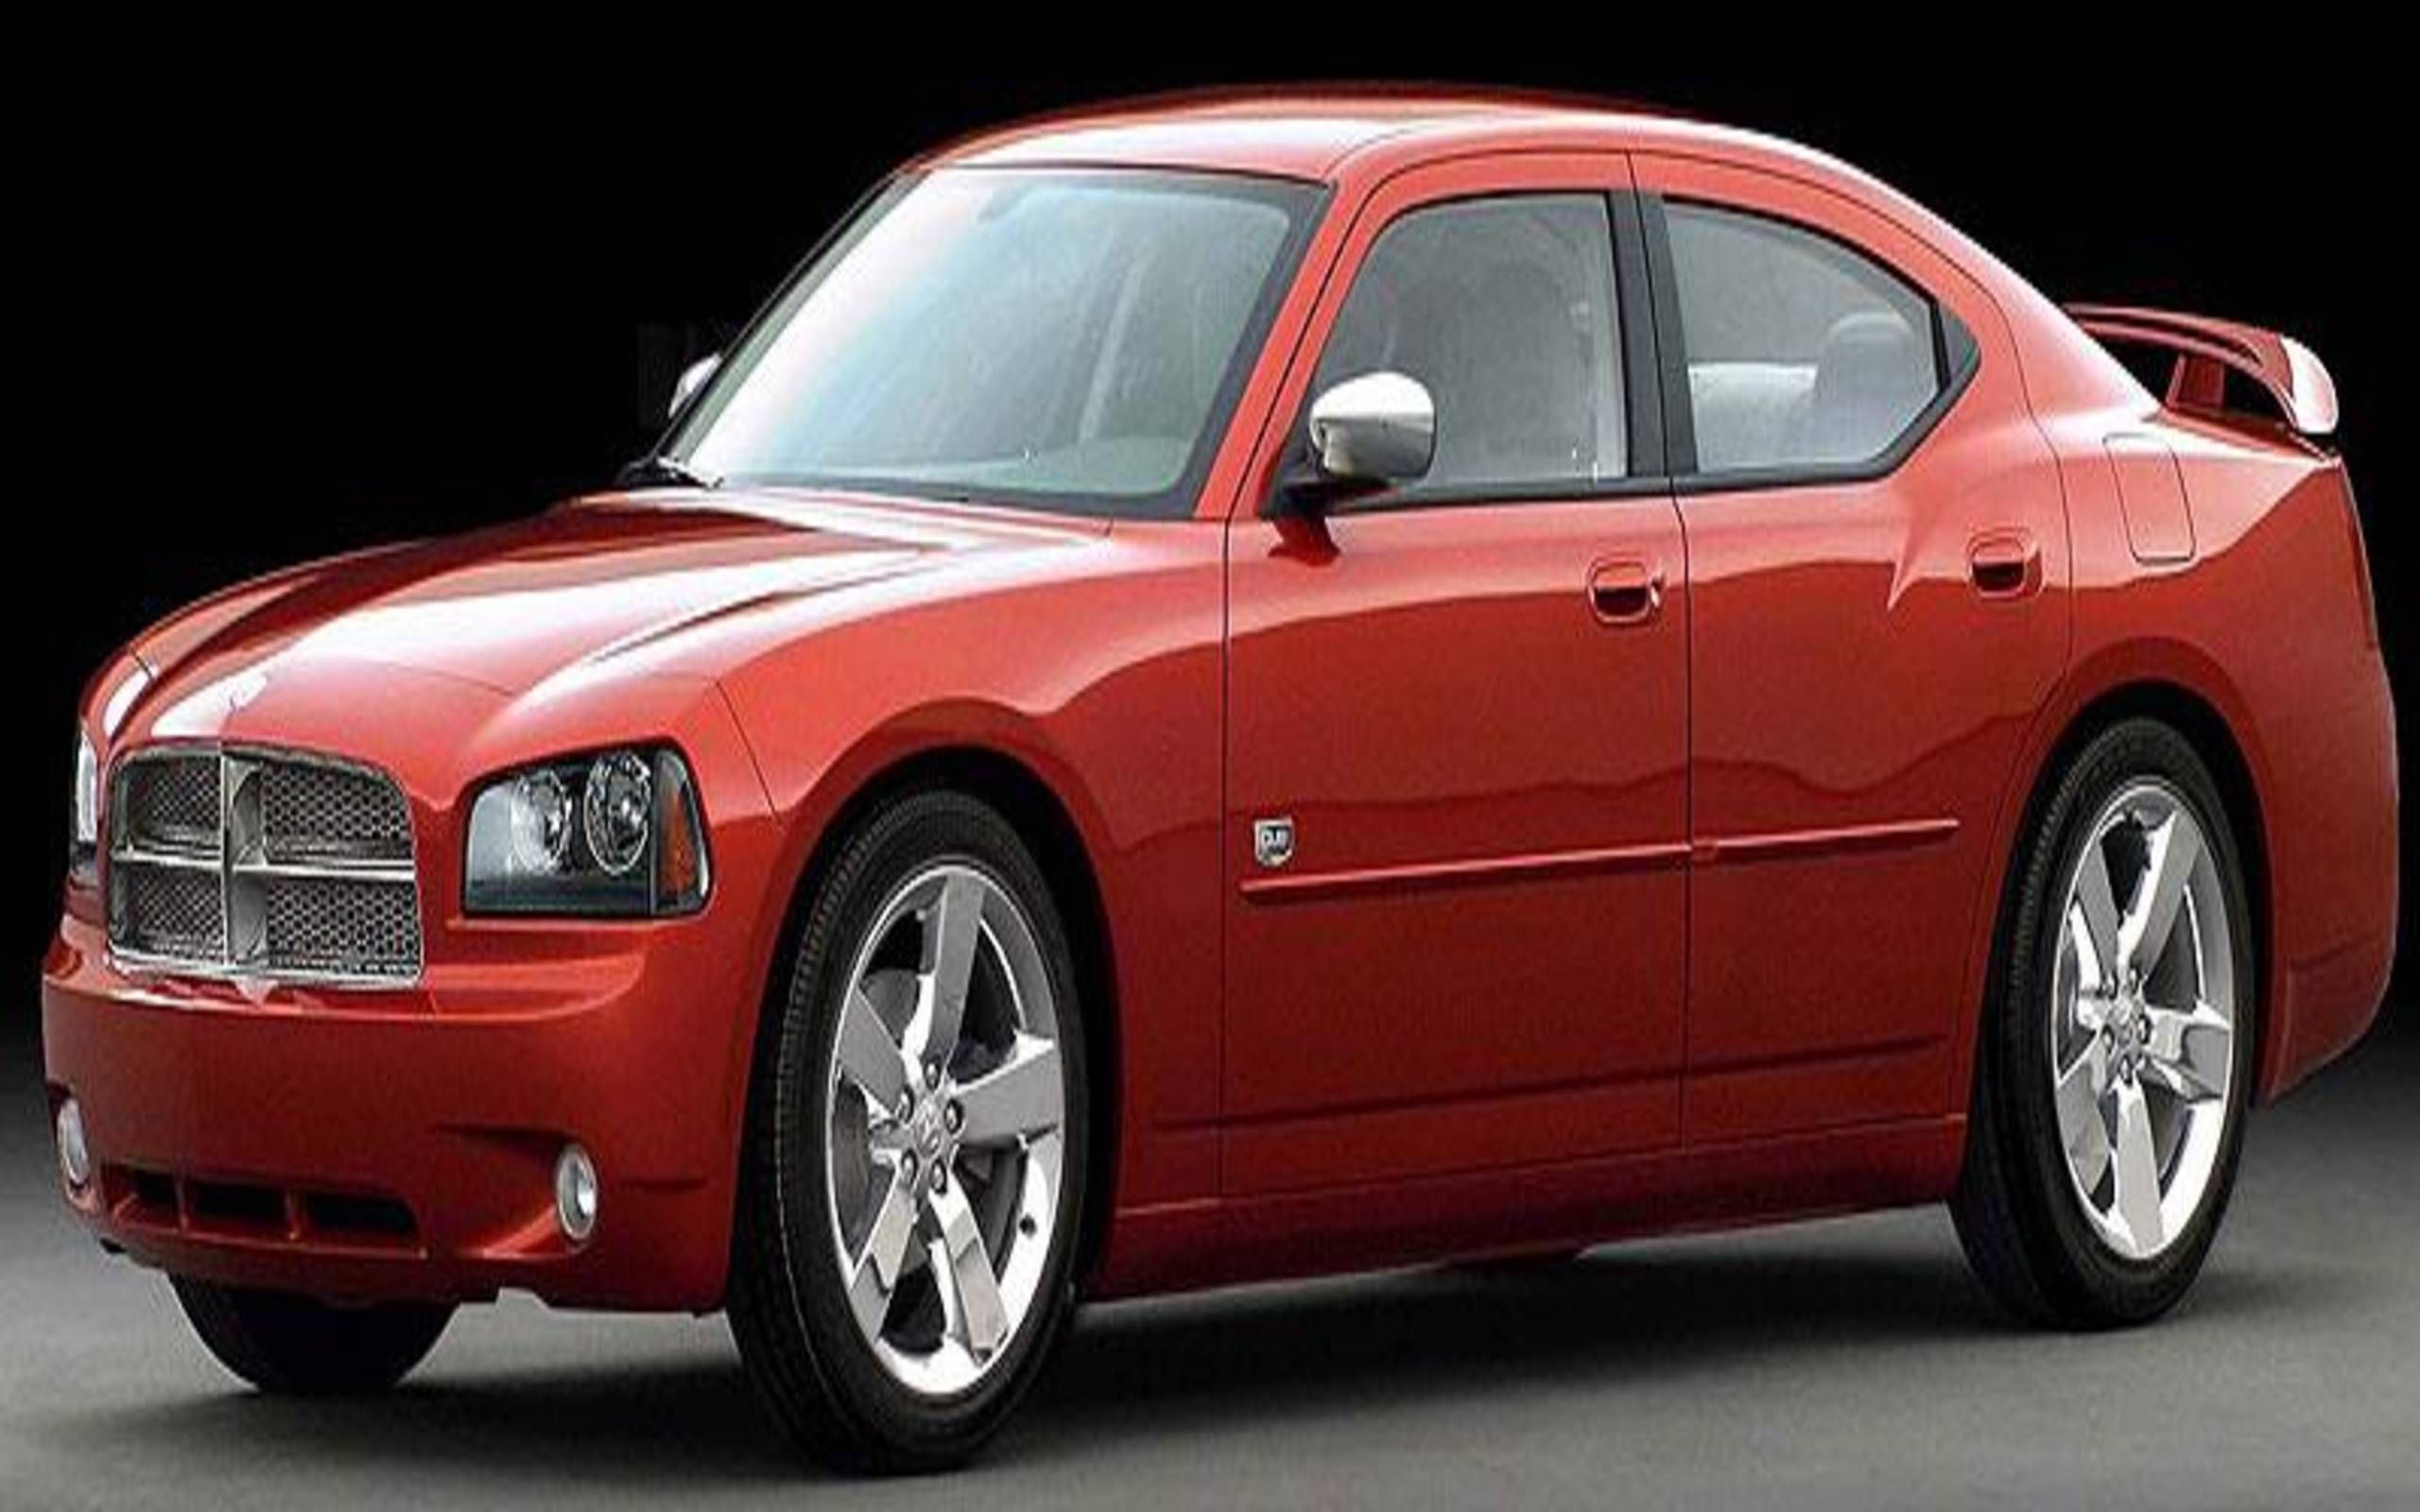 Chrysler 300 and Chrysler Charger get Dub packages